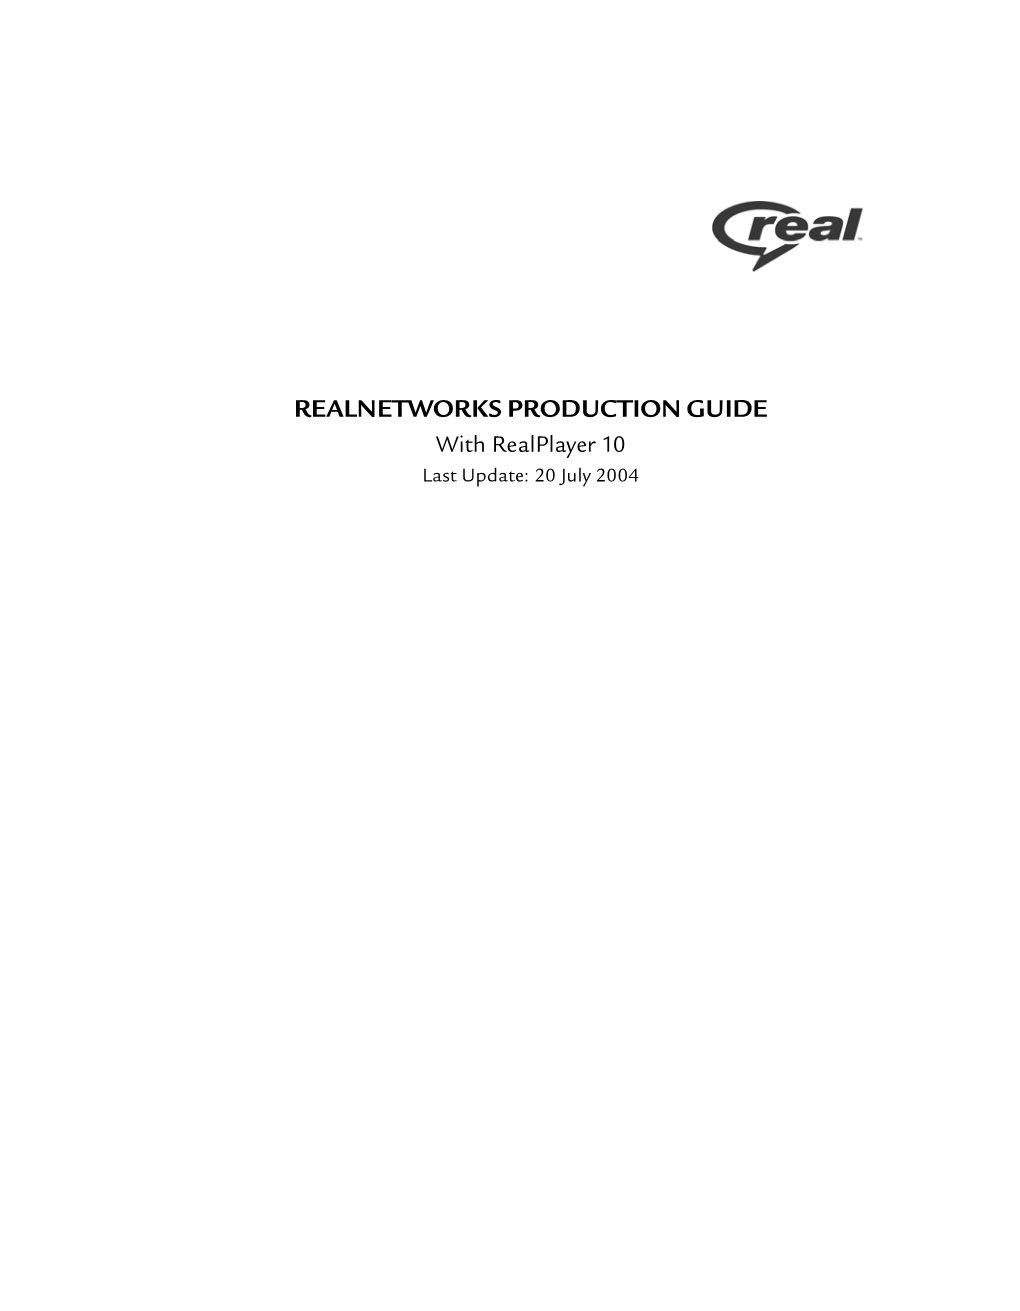 REALNETWORKS PRODUCTION GUIDE with Realplayer 10 Last Update: 20 July 2004 Realnetworks, Inc